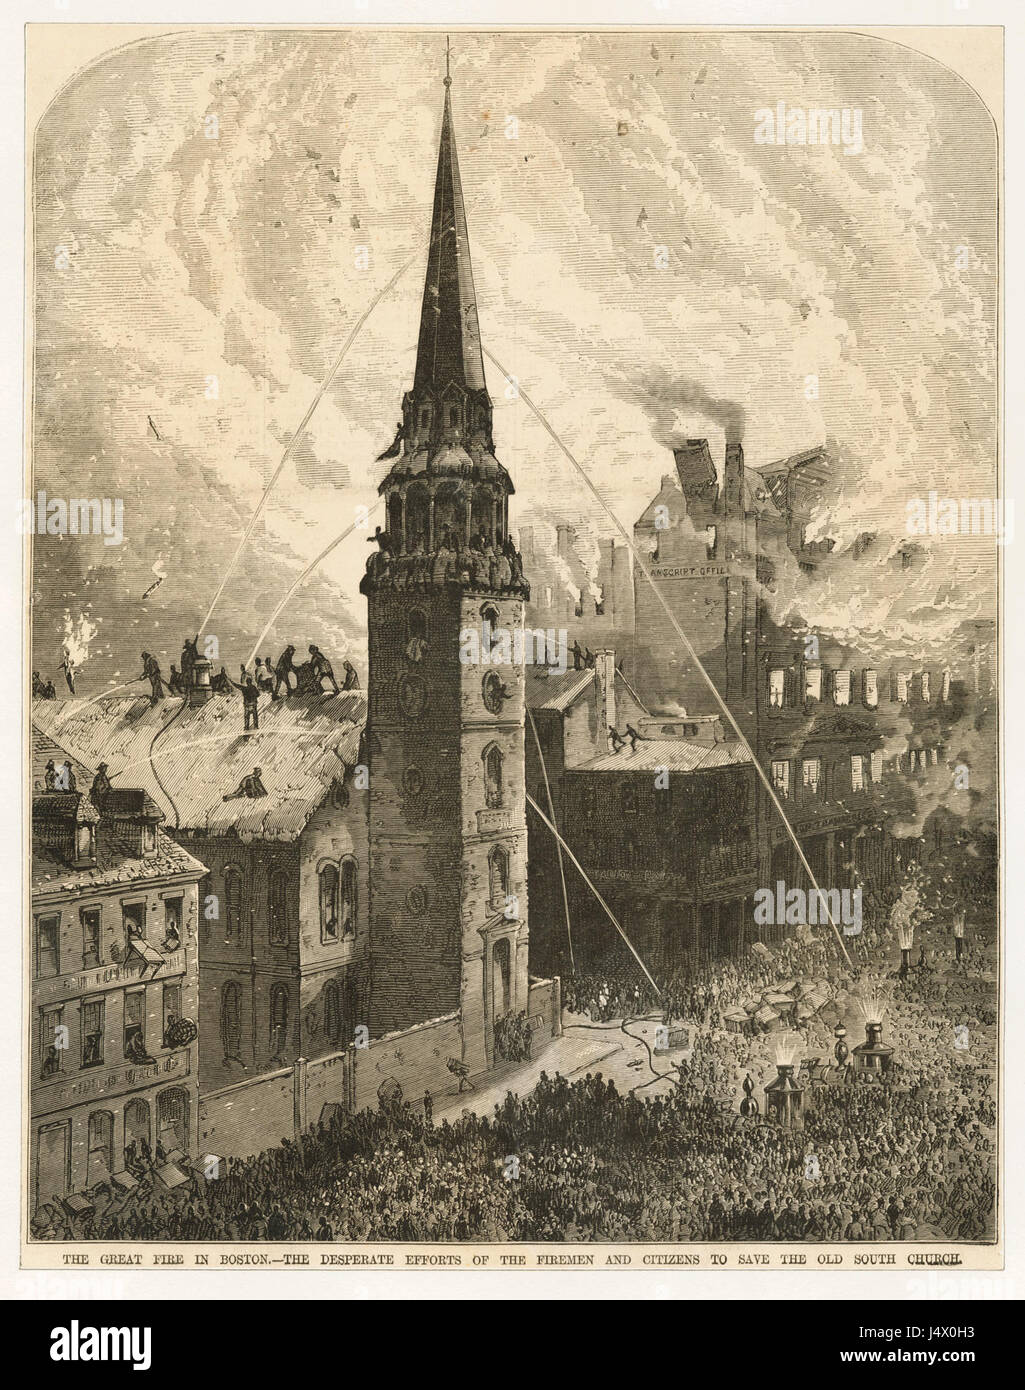 The great fire in Boston   the desperate attempts of the firemen and citizens to save the Old South Church (NYPL Hades 250405 465384) Stock Photo